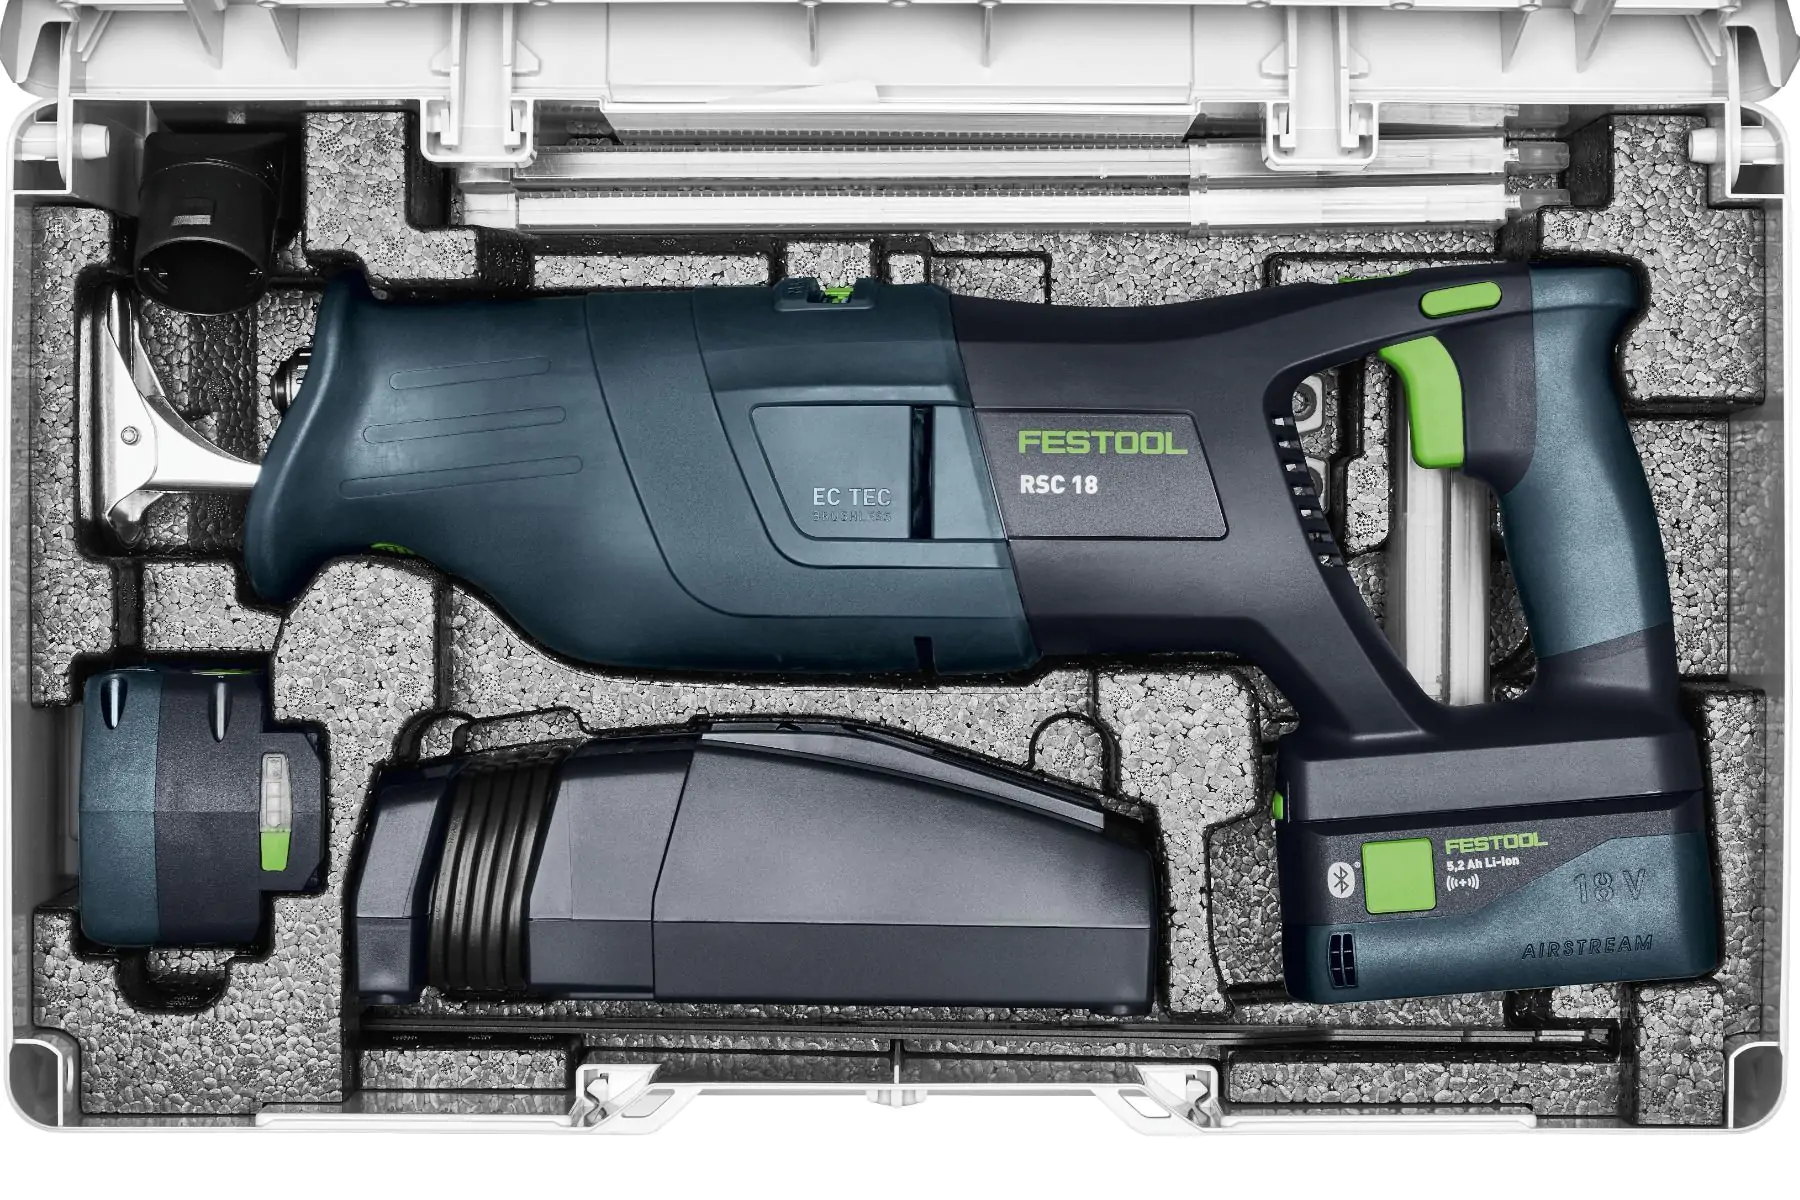 The RSC 18 Cordless Reciprocating Saw snugly packed away in a systainer